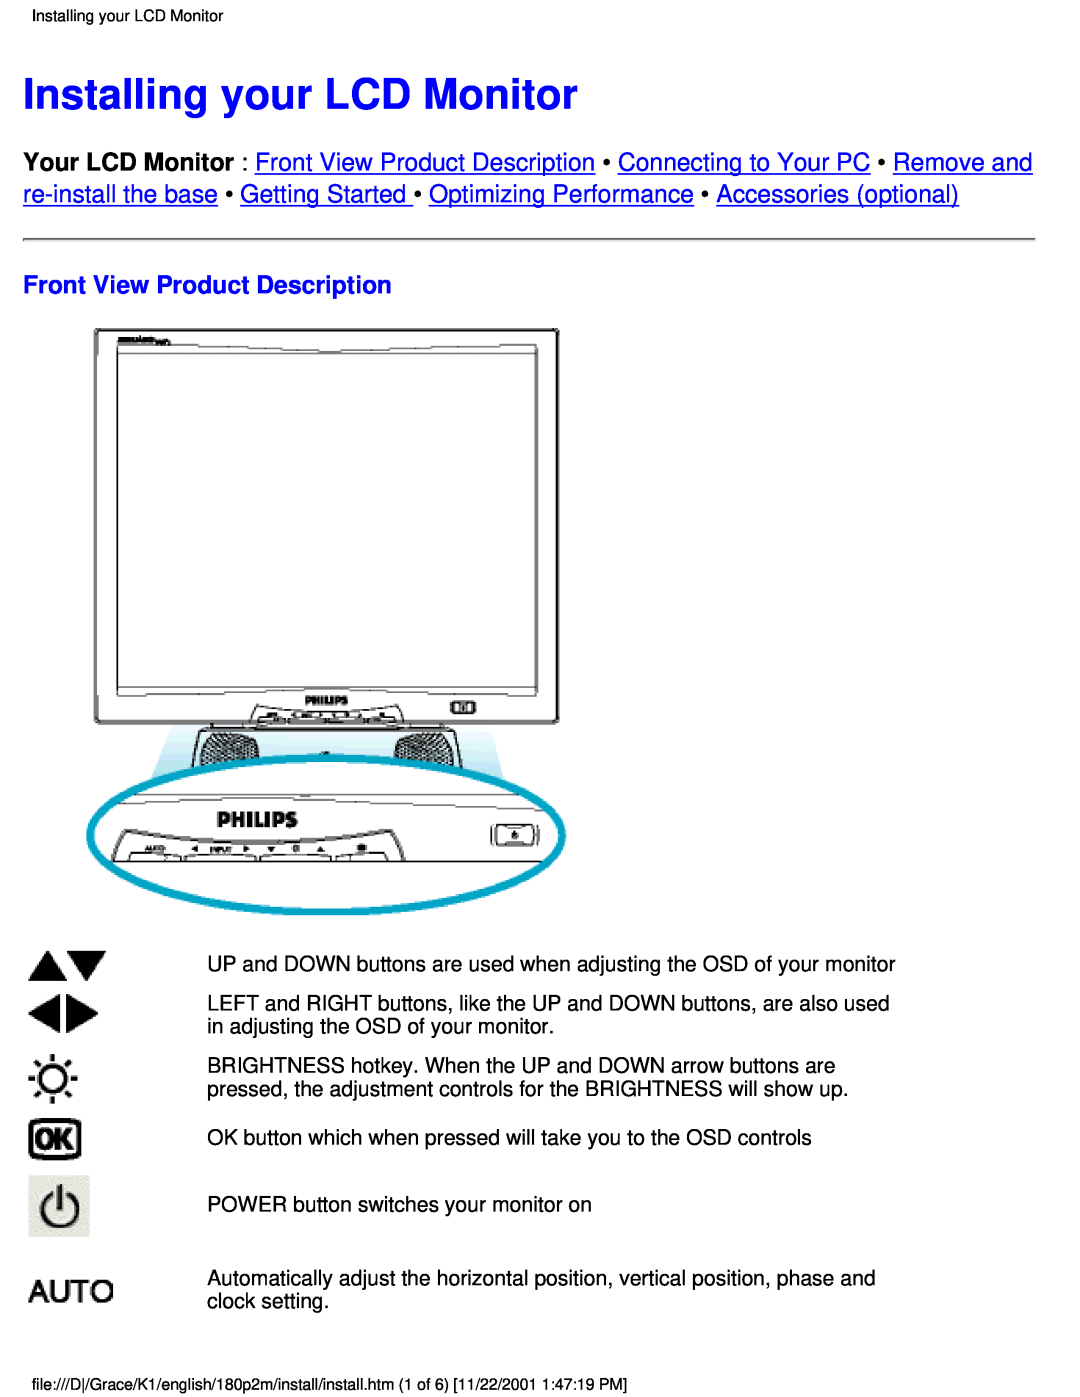 Philips 180P2M user manual Installing your LCD Monitor, Front View Product Description 